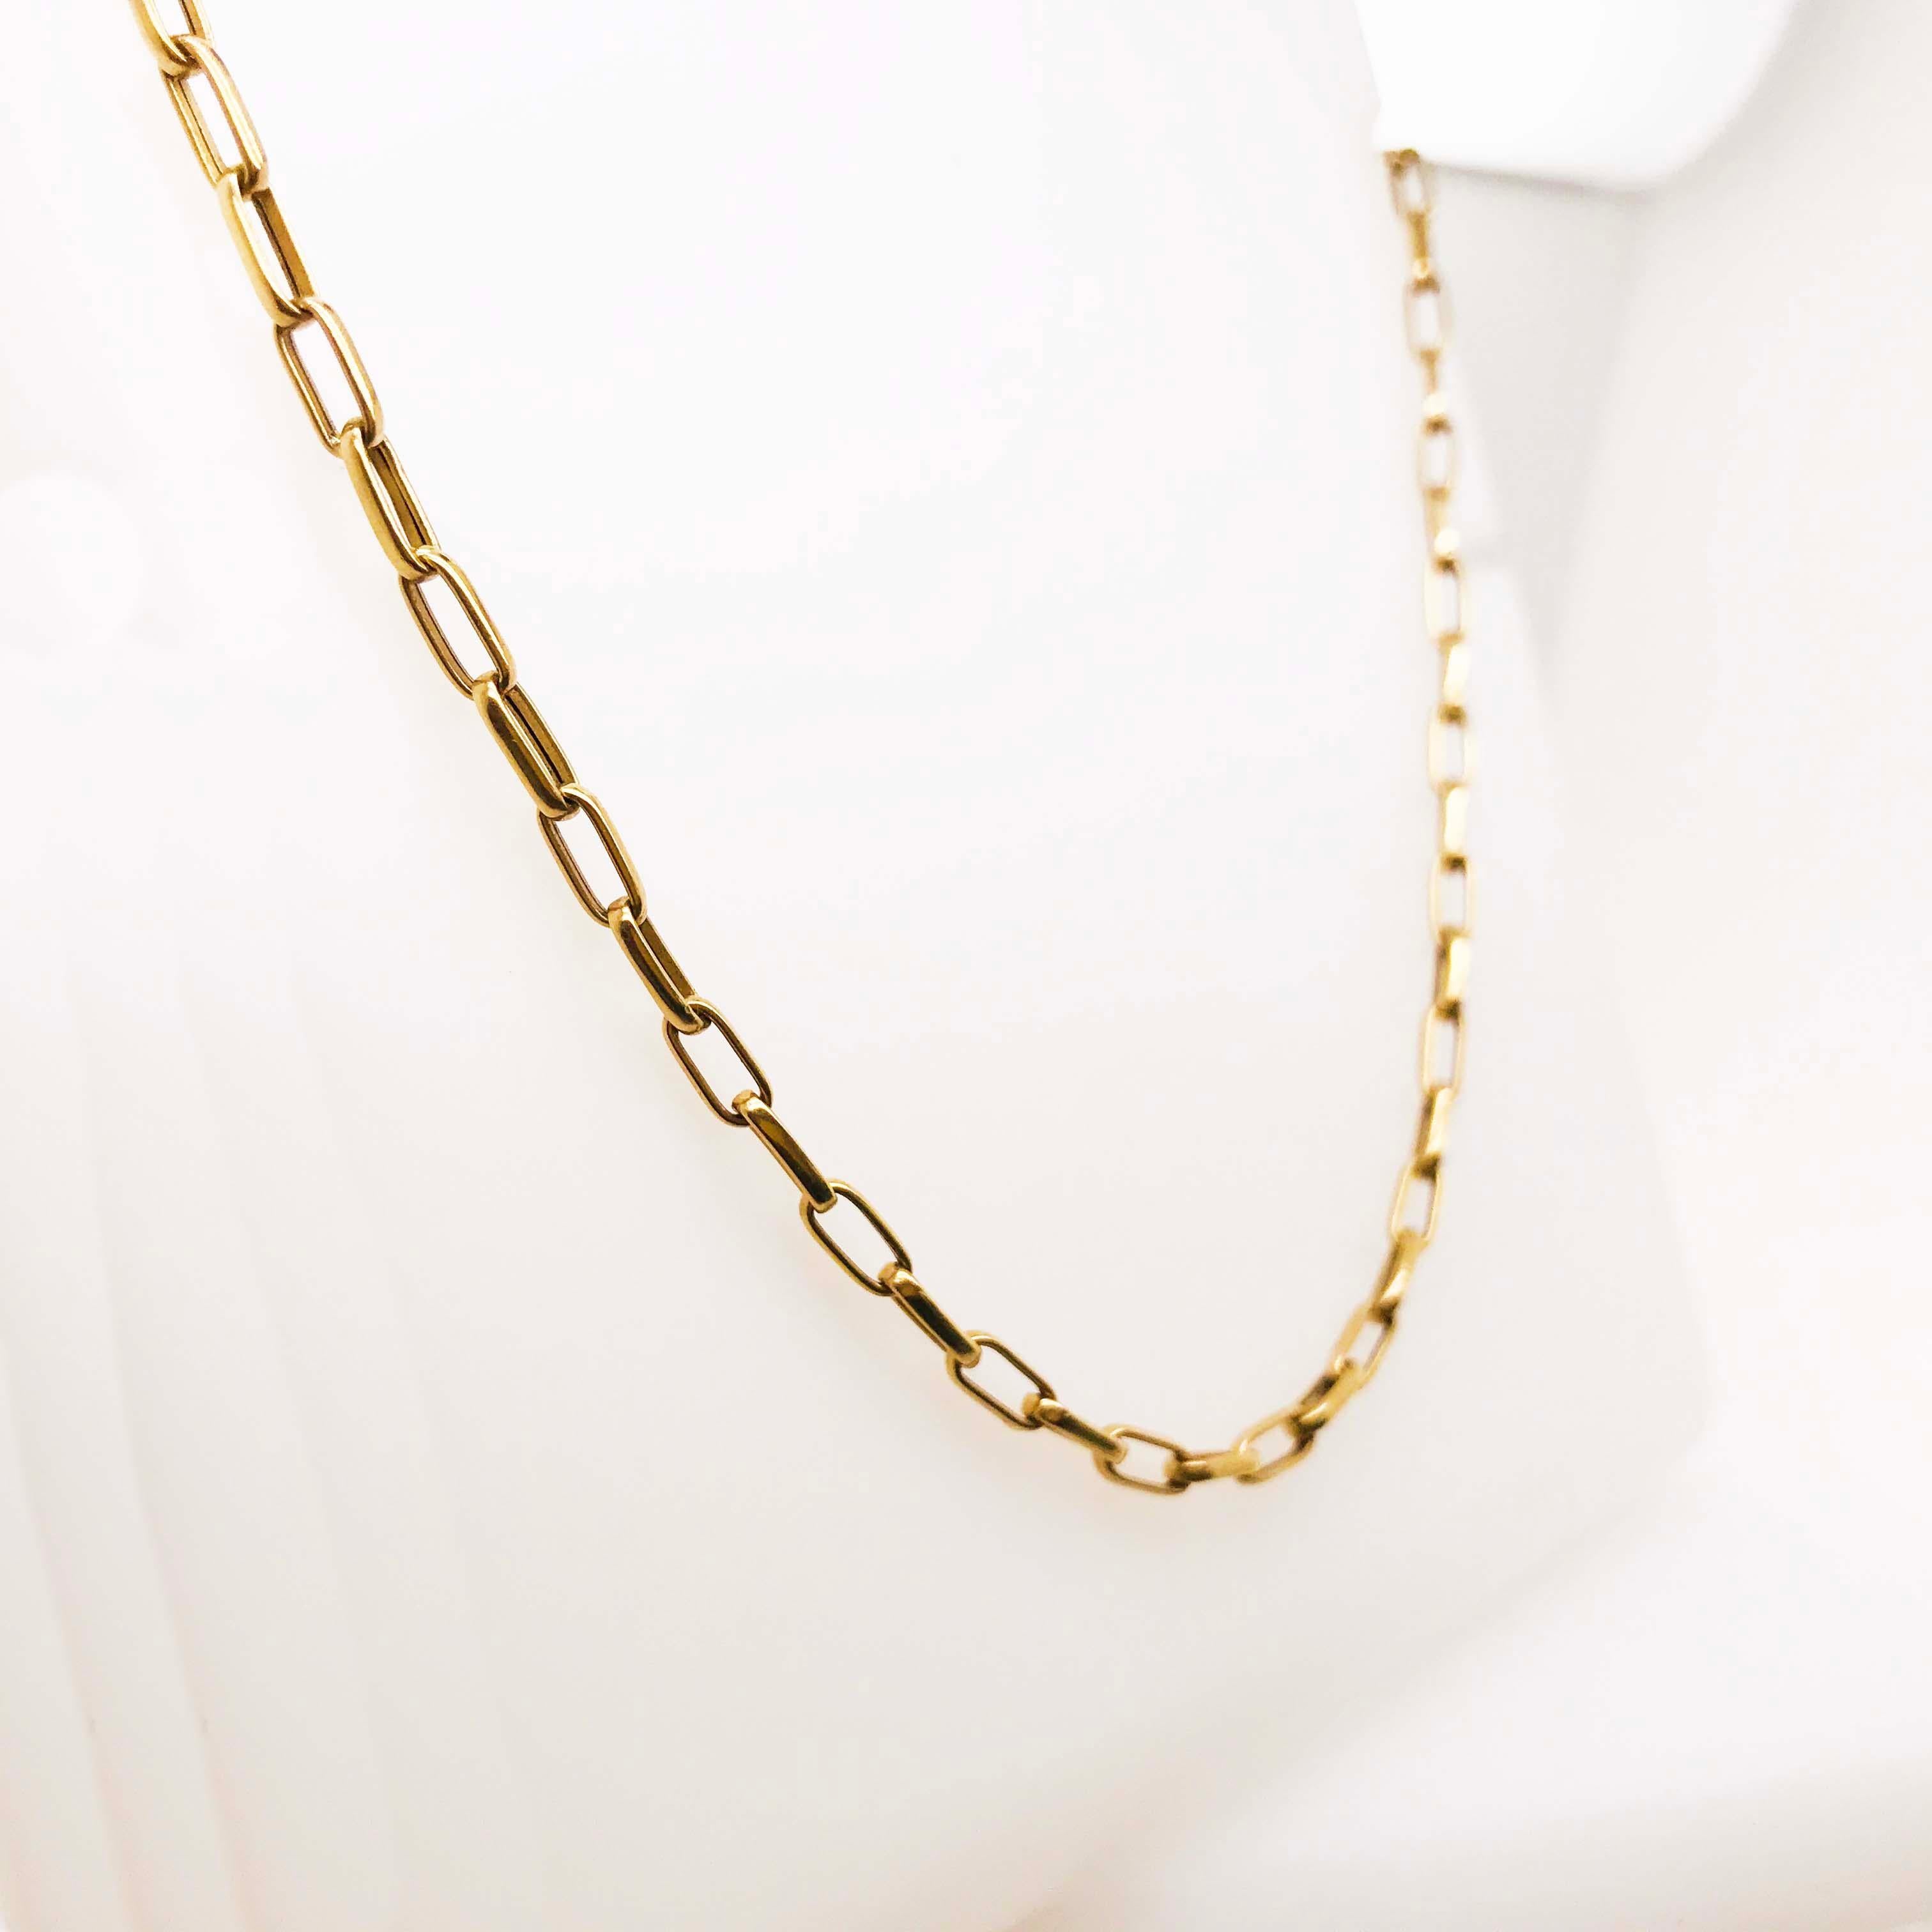 Women's or Men's Paperclip Chain Necklace 14 Karat Yellow Gold Paperclip Link Chain